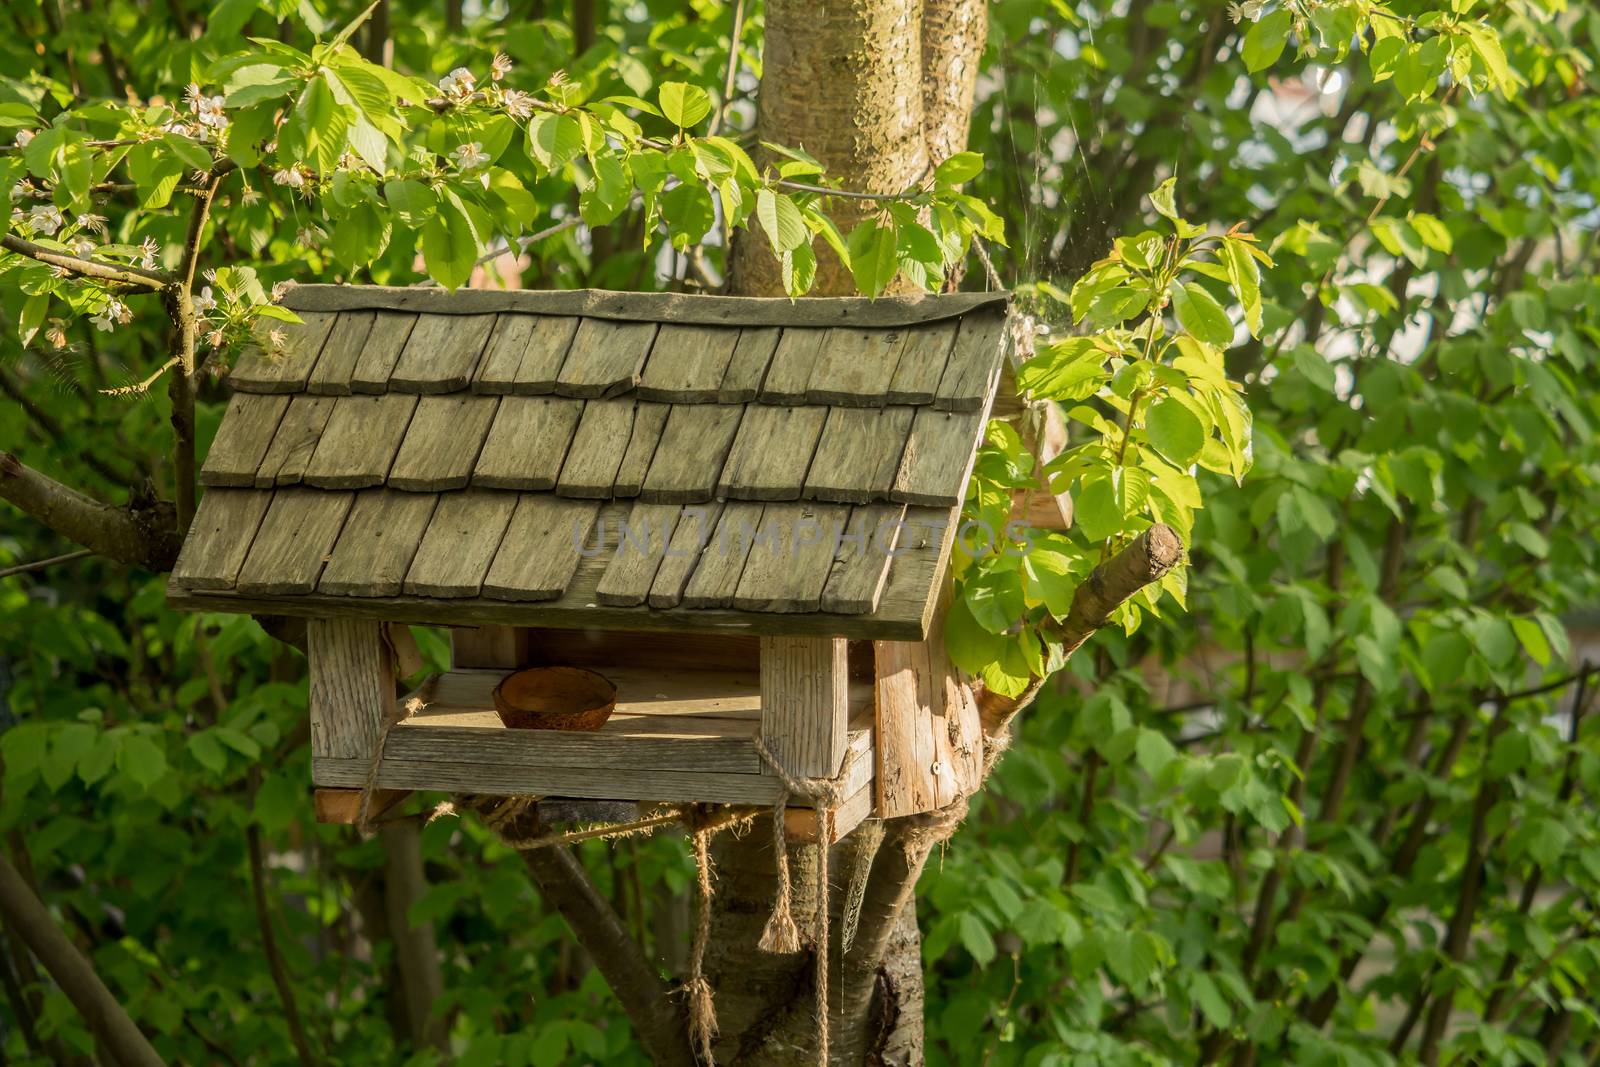 A small birdhouse hangs on the tree by sandra_fotodesign